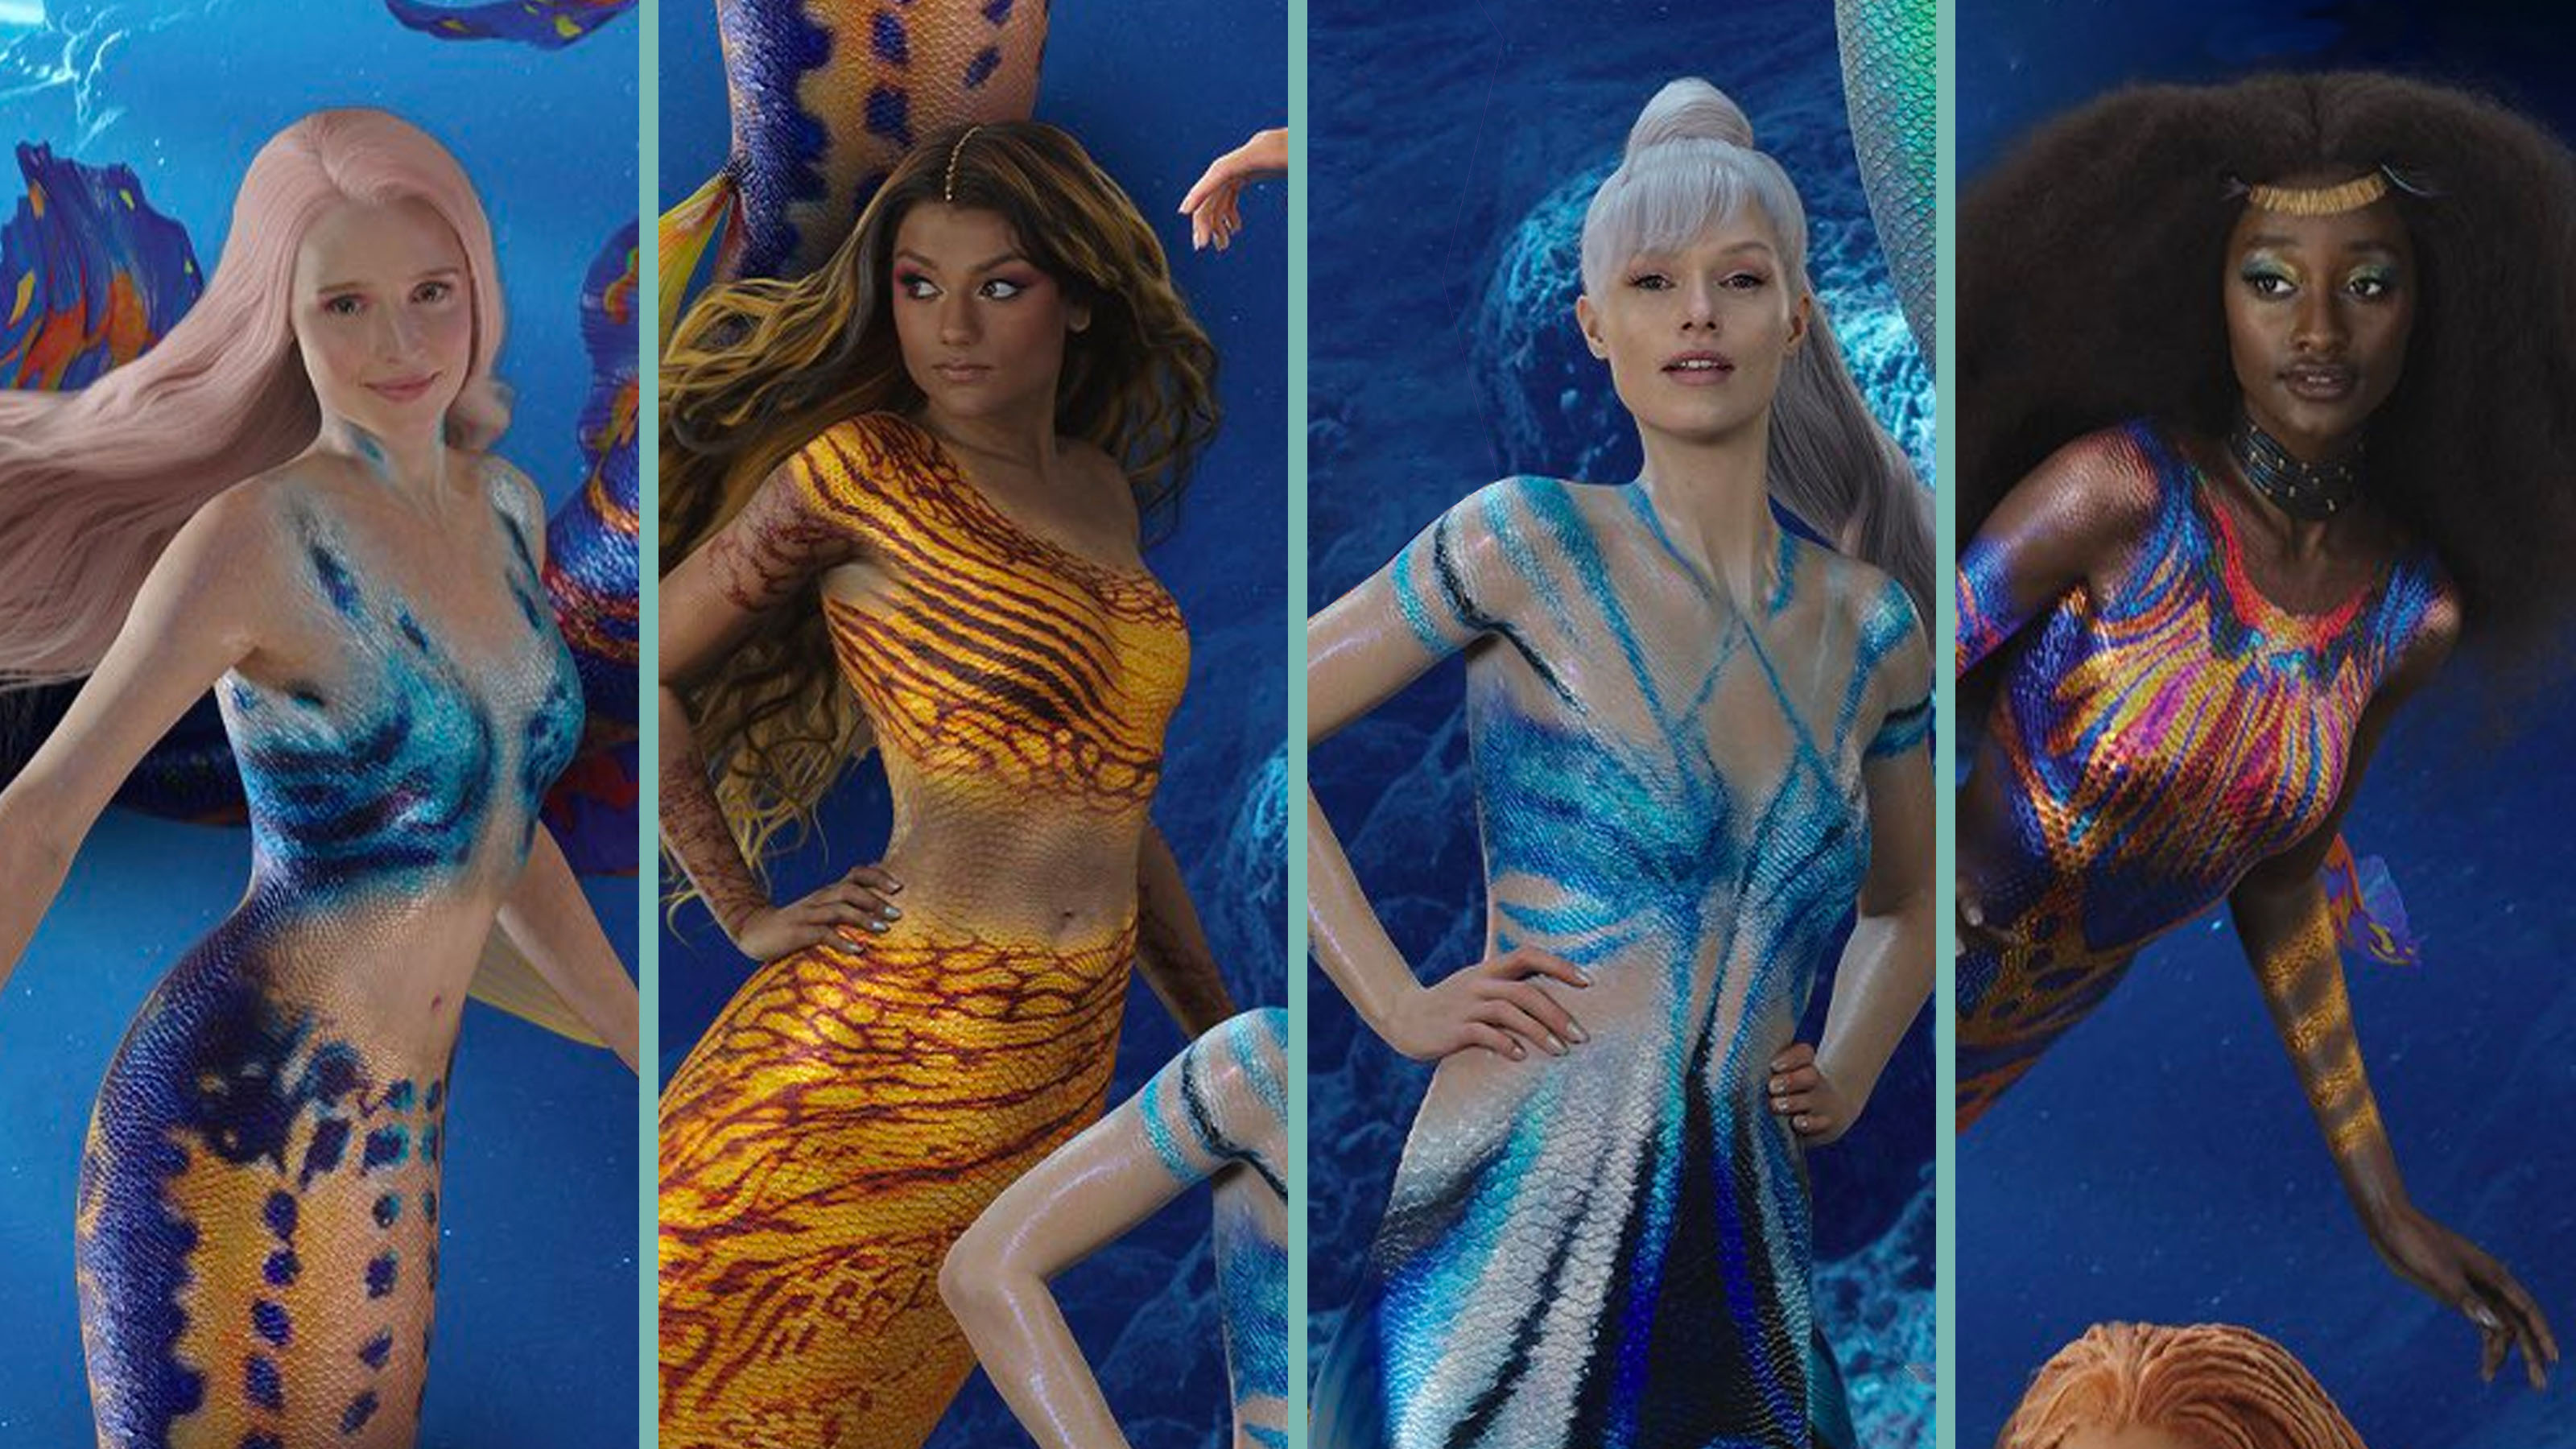 little mermaid poster controversy